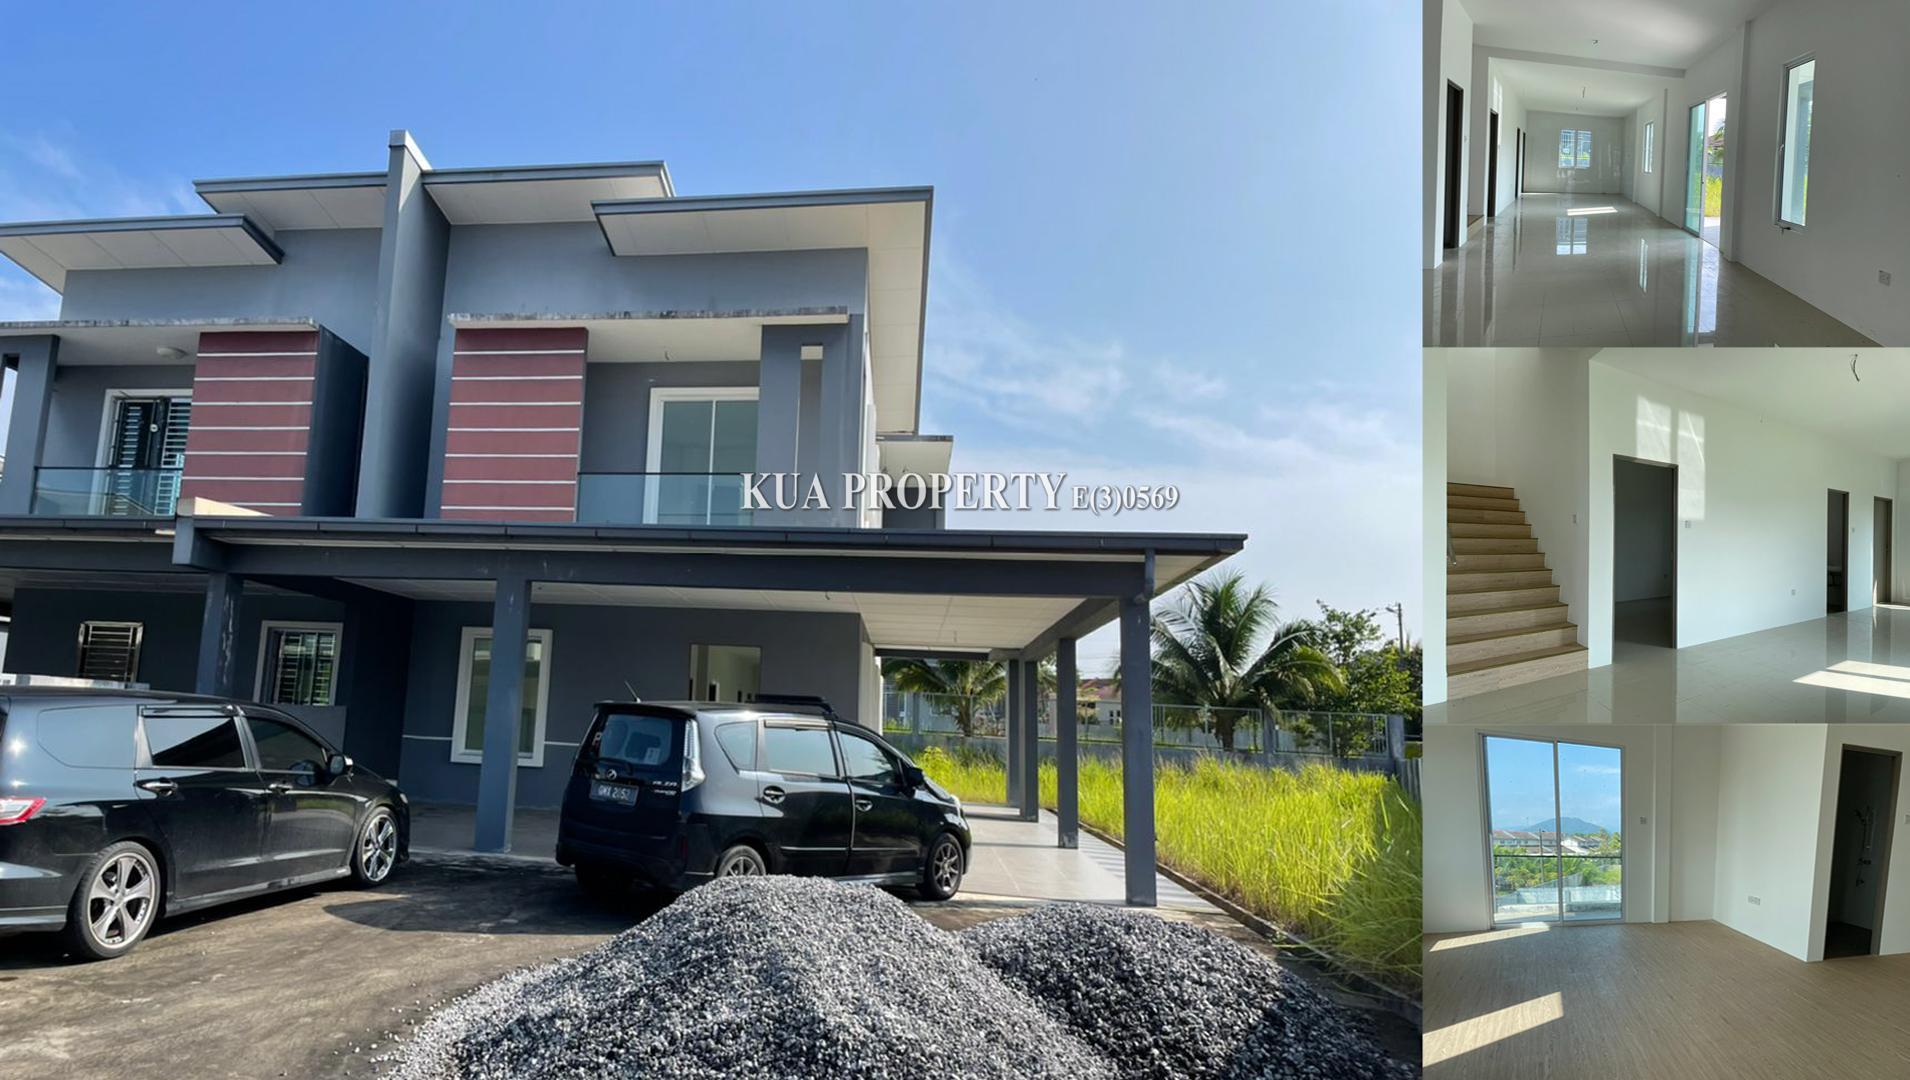 Double Storey Semi Detached House For Sale! Located at Desa Moyan, Kuching